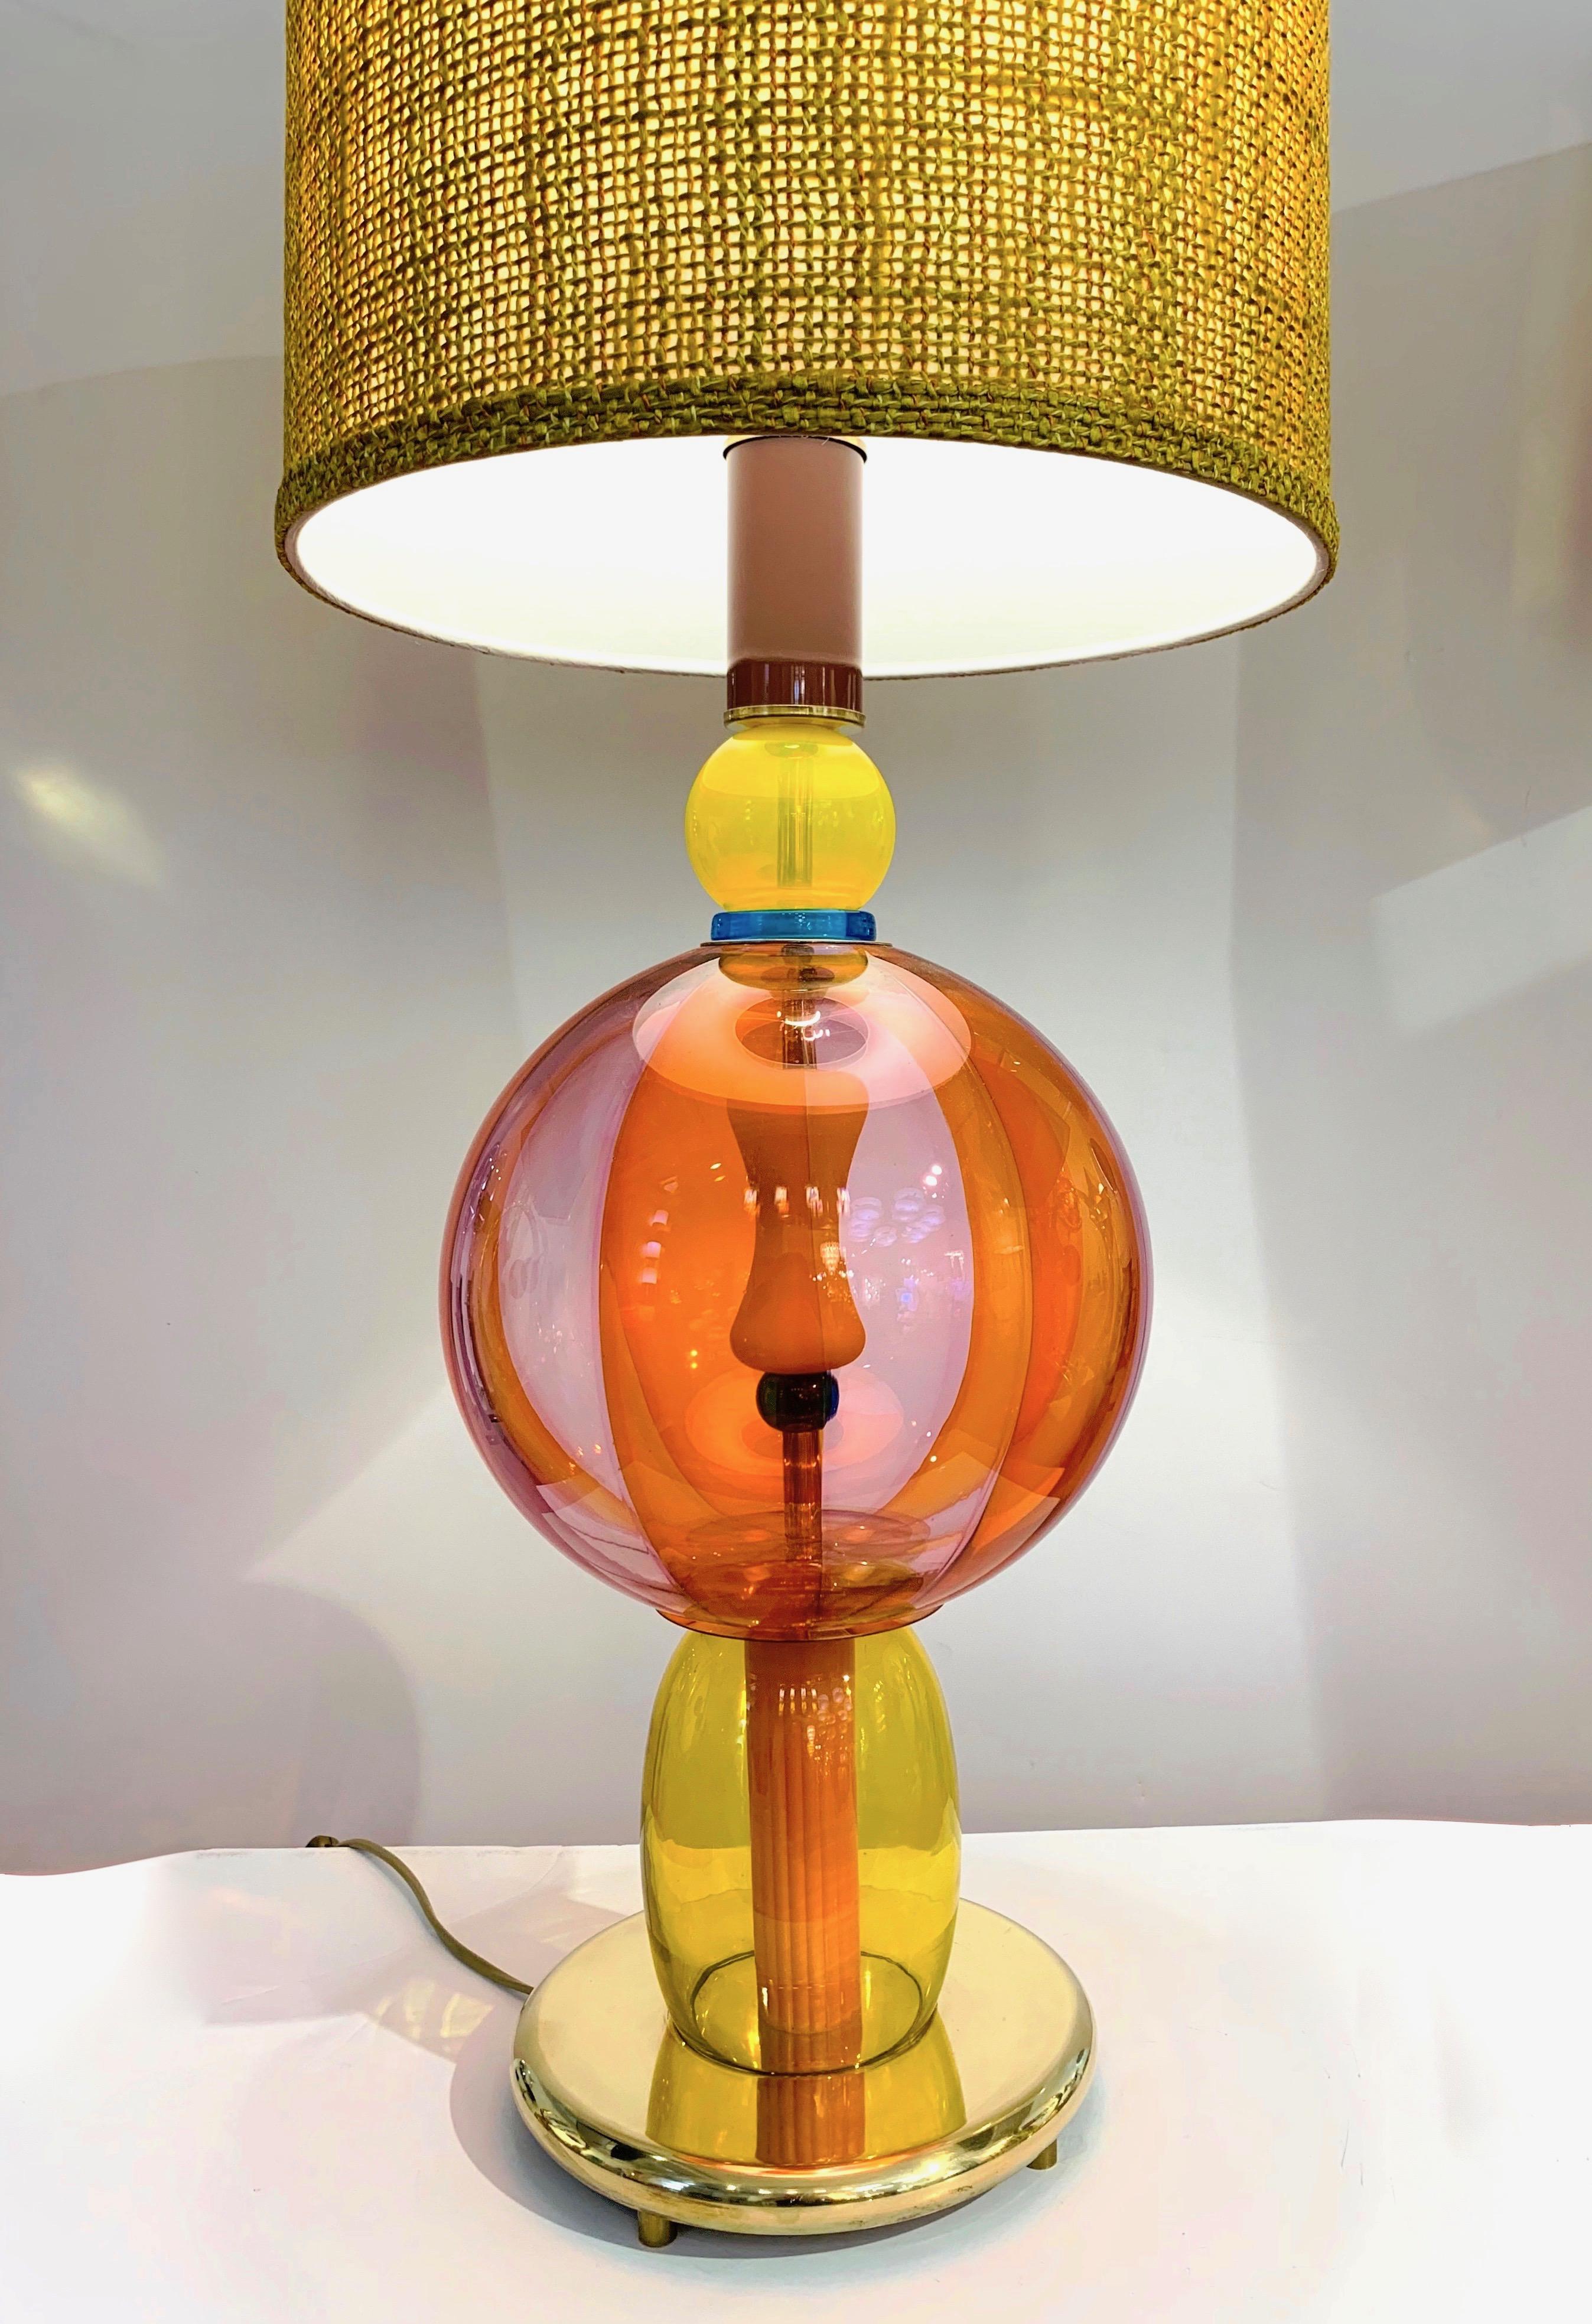 1980s one-of-a-kind Memphis style Italian table lamp, entirely handcrafted, consisting of a succession of different glass elements in blown Murano Art glass in various shapes with a typical Pop Art palette in orange, yellow, purple plum with a